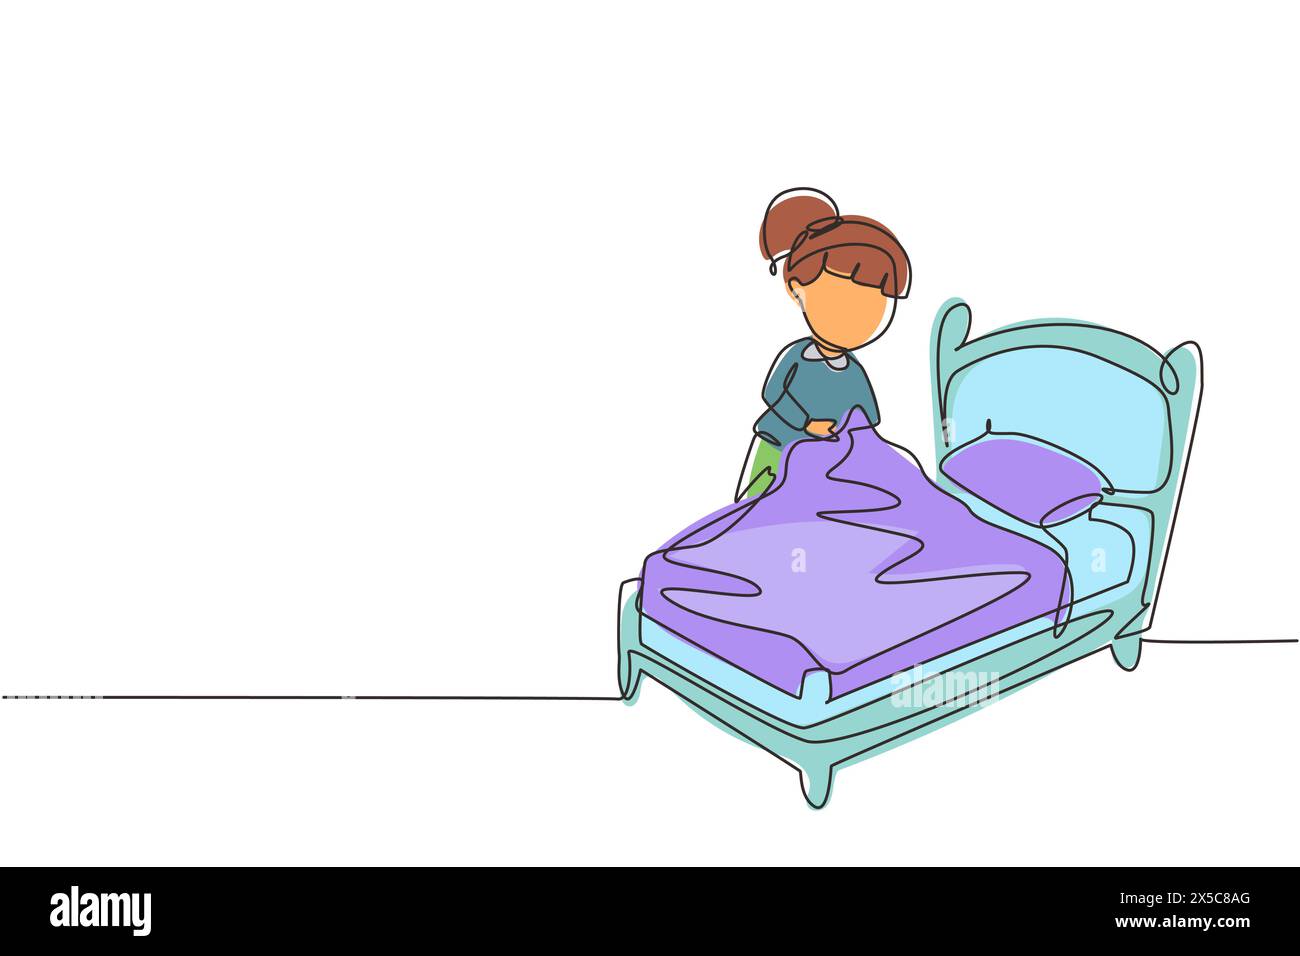 Continuous one line drawing cute girl making the bed. Kids doing housework chores at home concept. Kids routine after waking up to tidy up the bed. Si Stock Vector